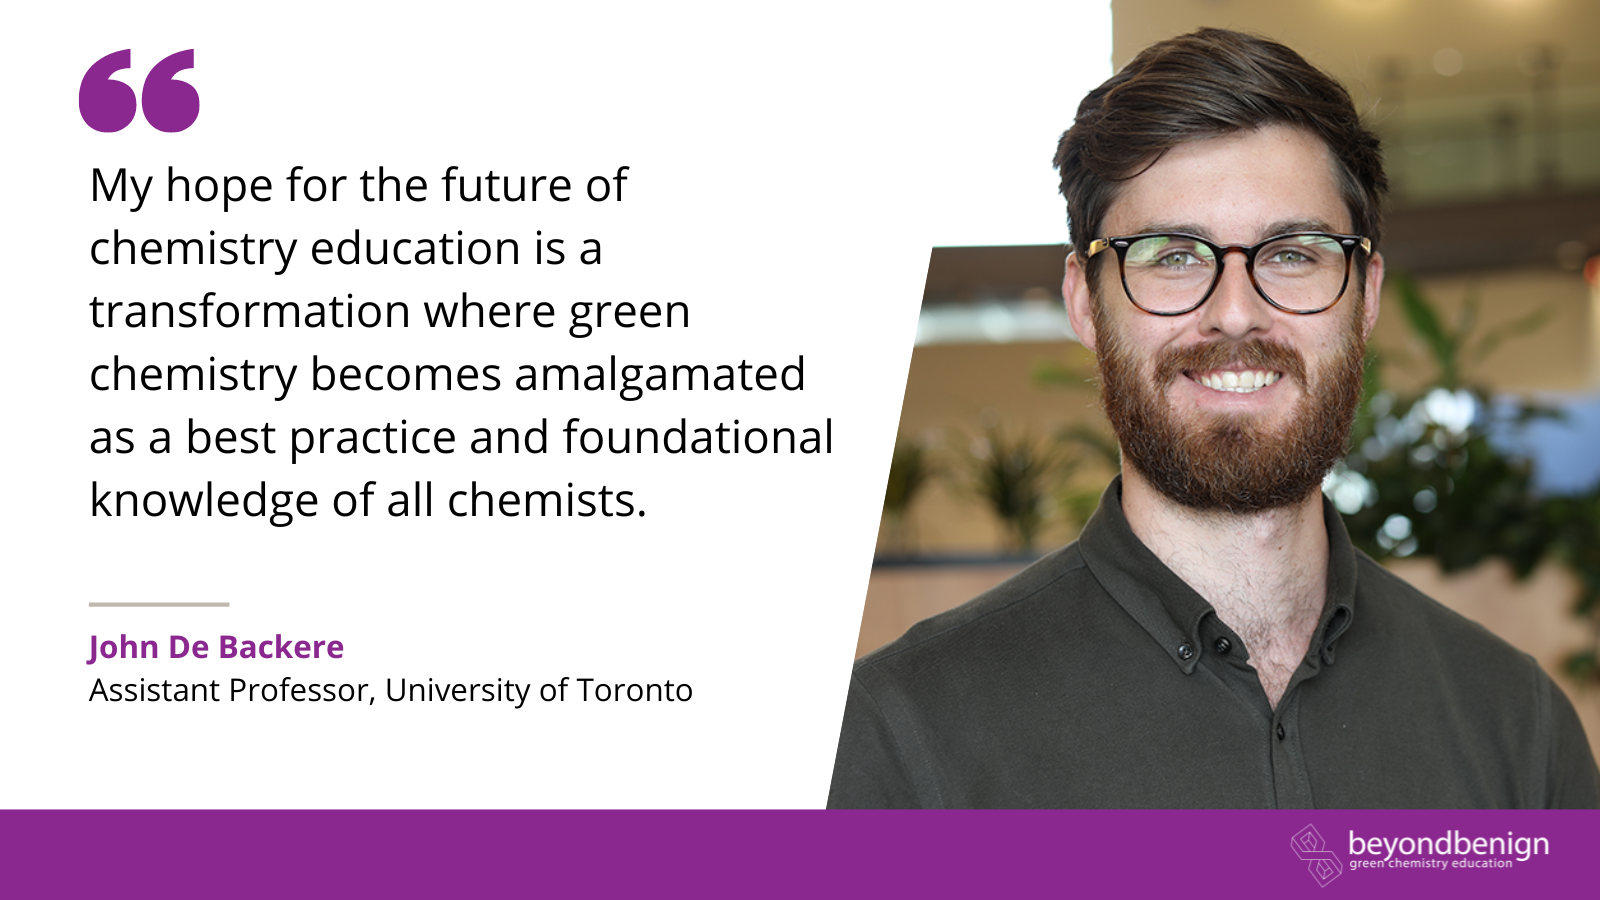 Graphic features a photo of John De Backere, Assistant Professor at the University of Toronto, and a quote from him that reads: "My hope for the future of chemistry education is a transformation where green chemistry becomes amalgamated as a best practice and foundational knowledge of all chemists."